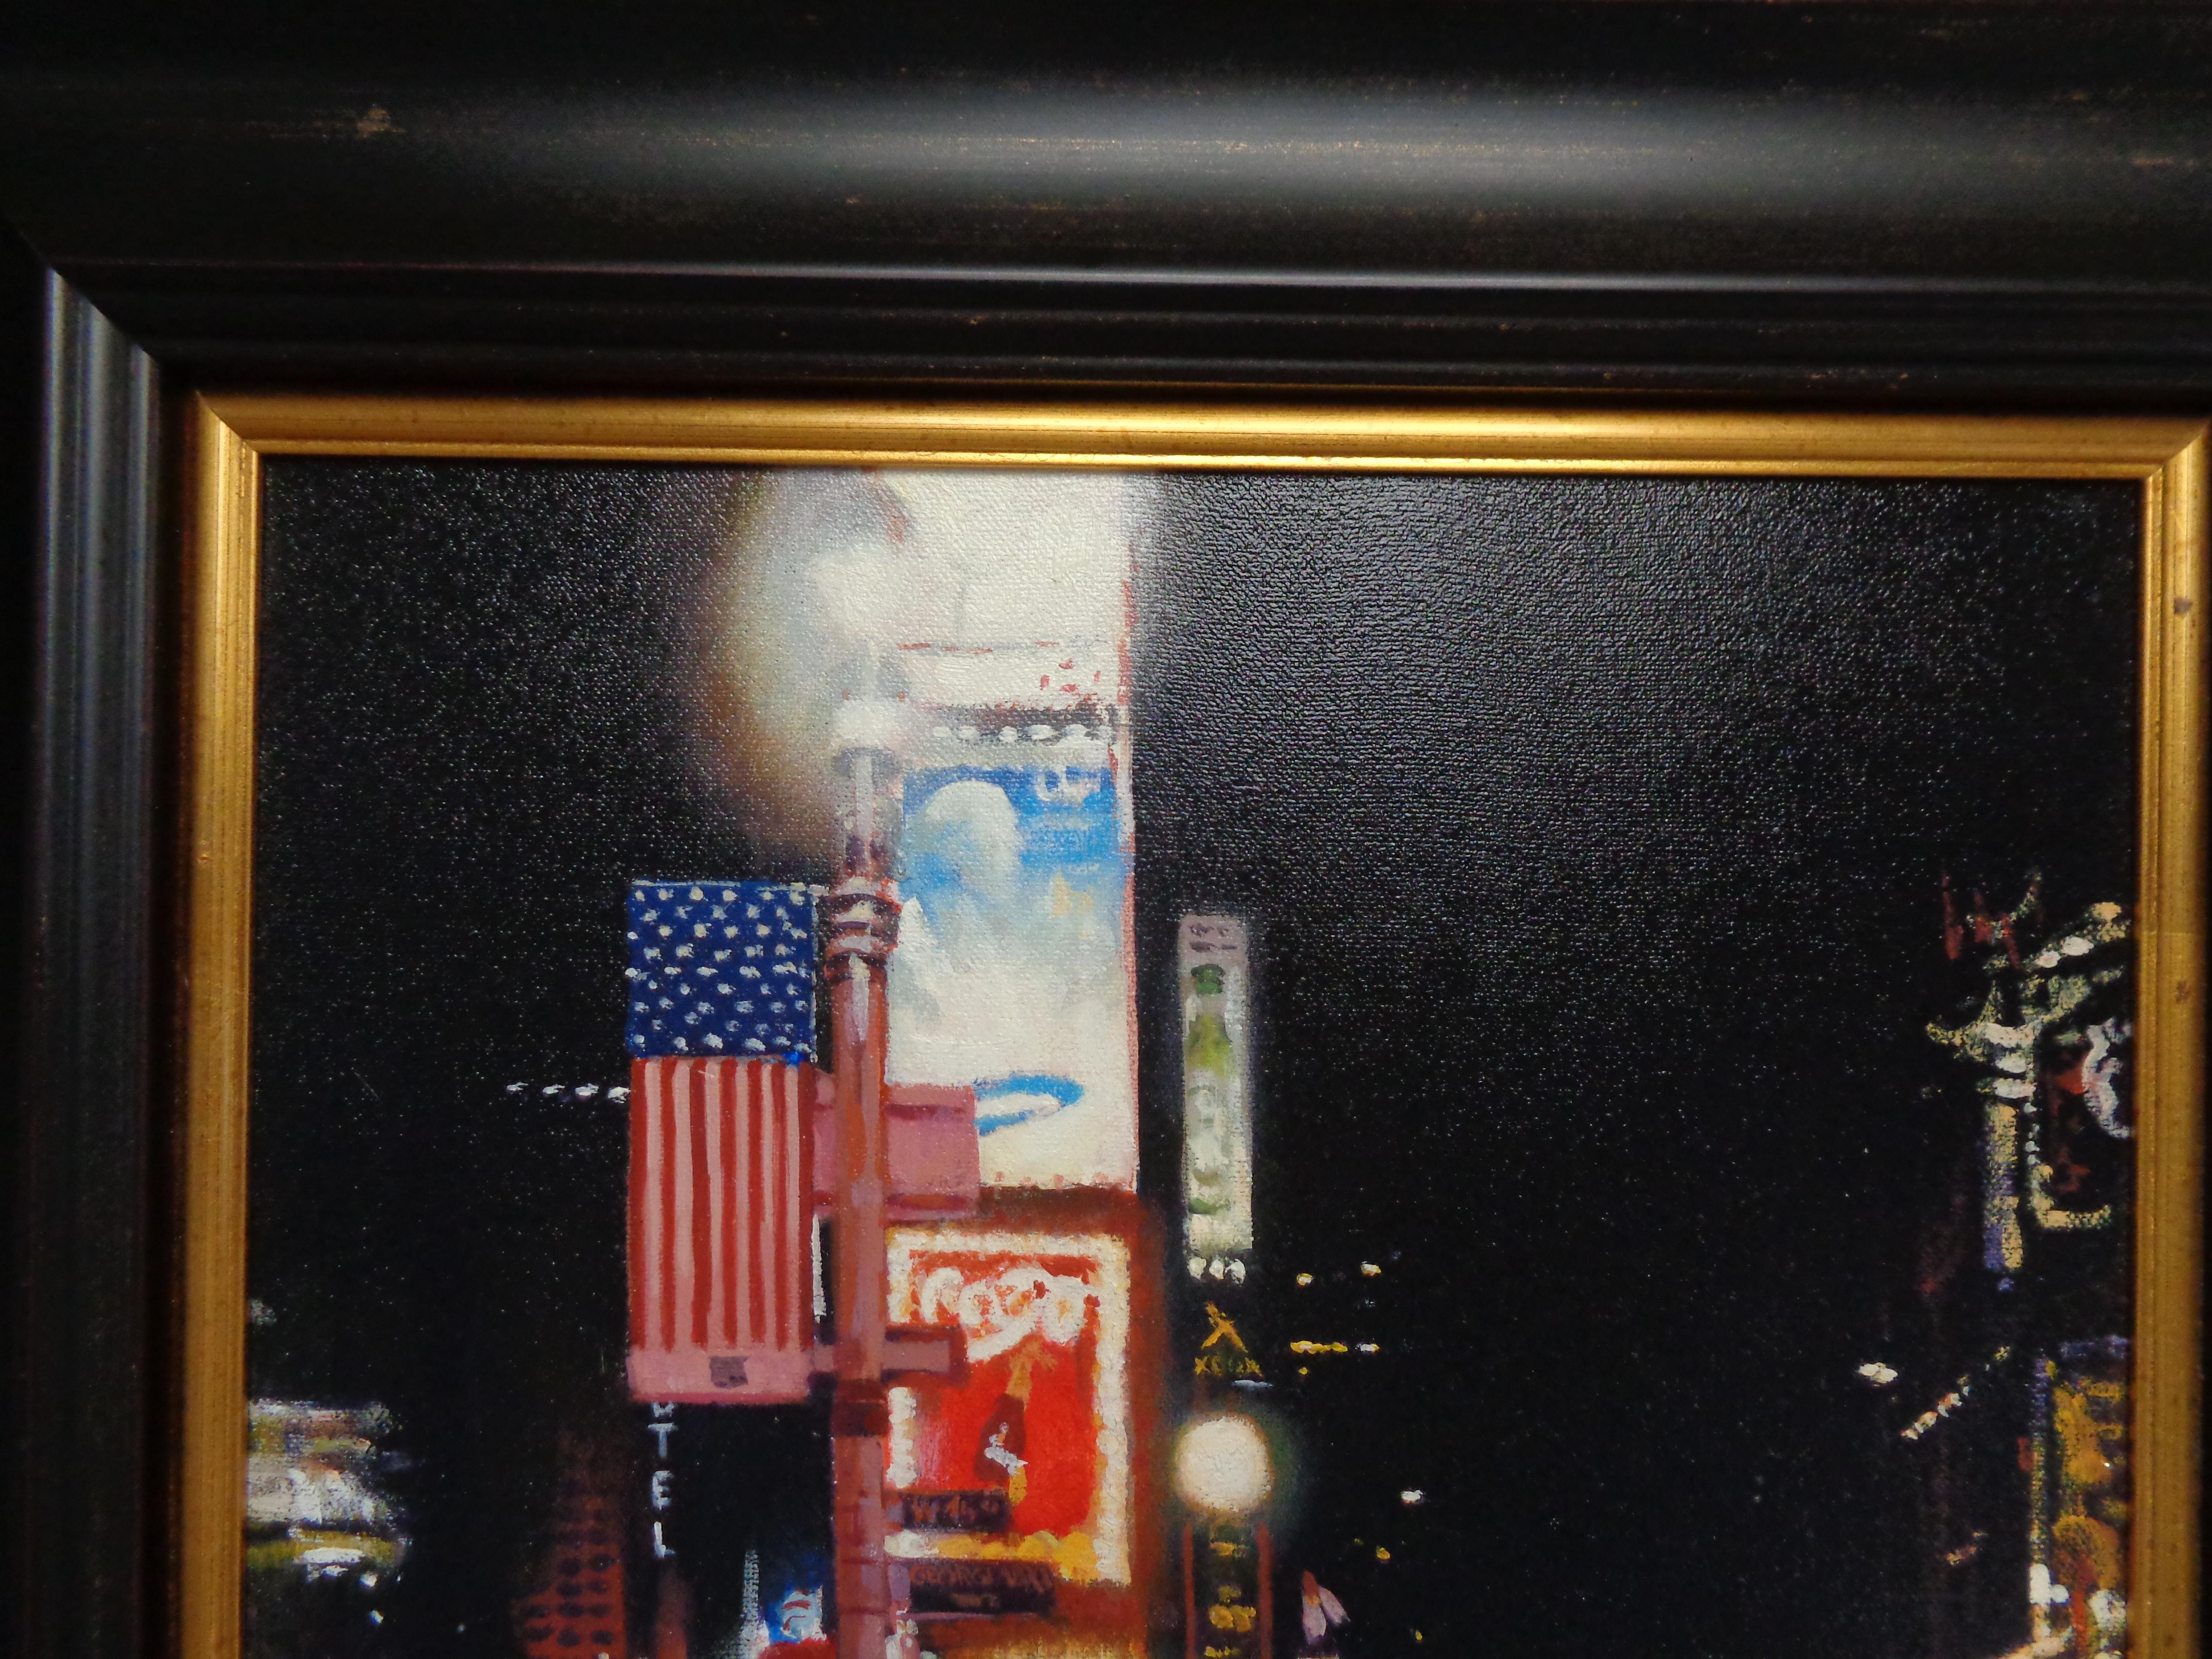  New York City Painting Times Square, Nocturne by Michael Budden  For Sale 1